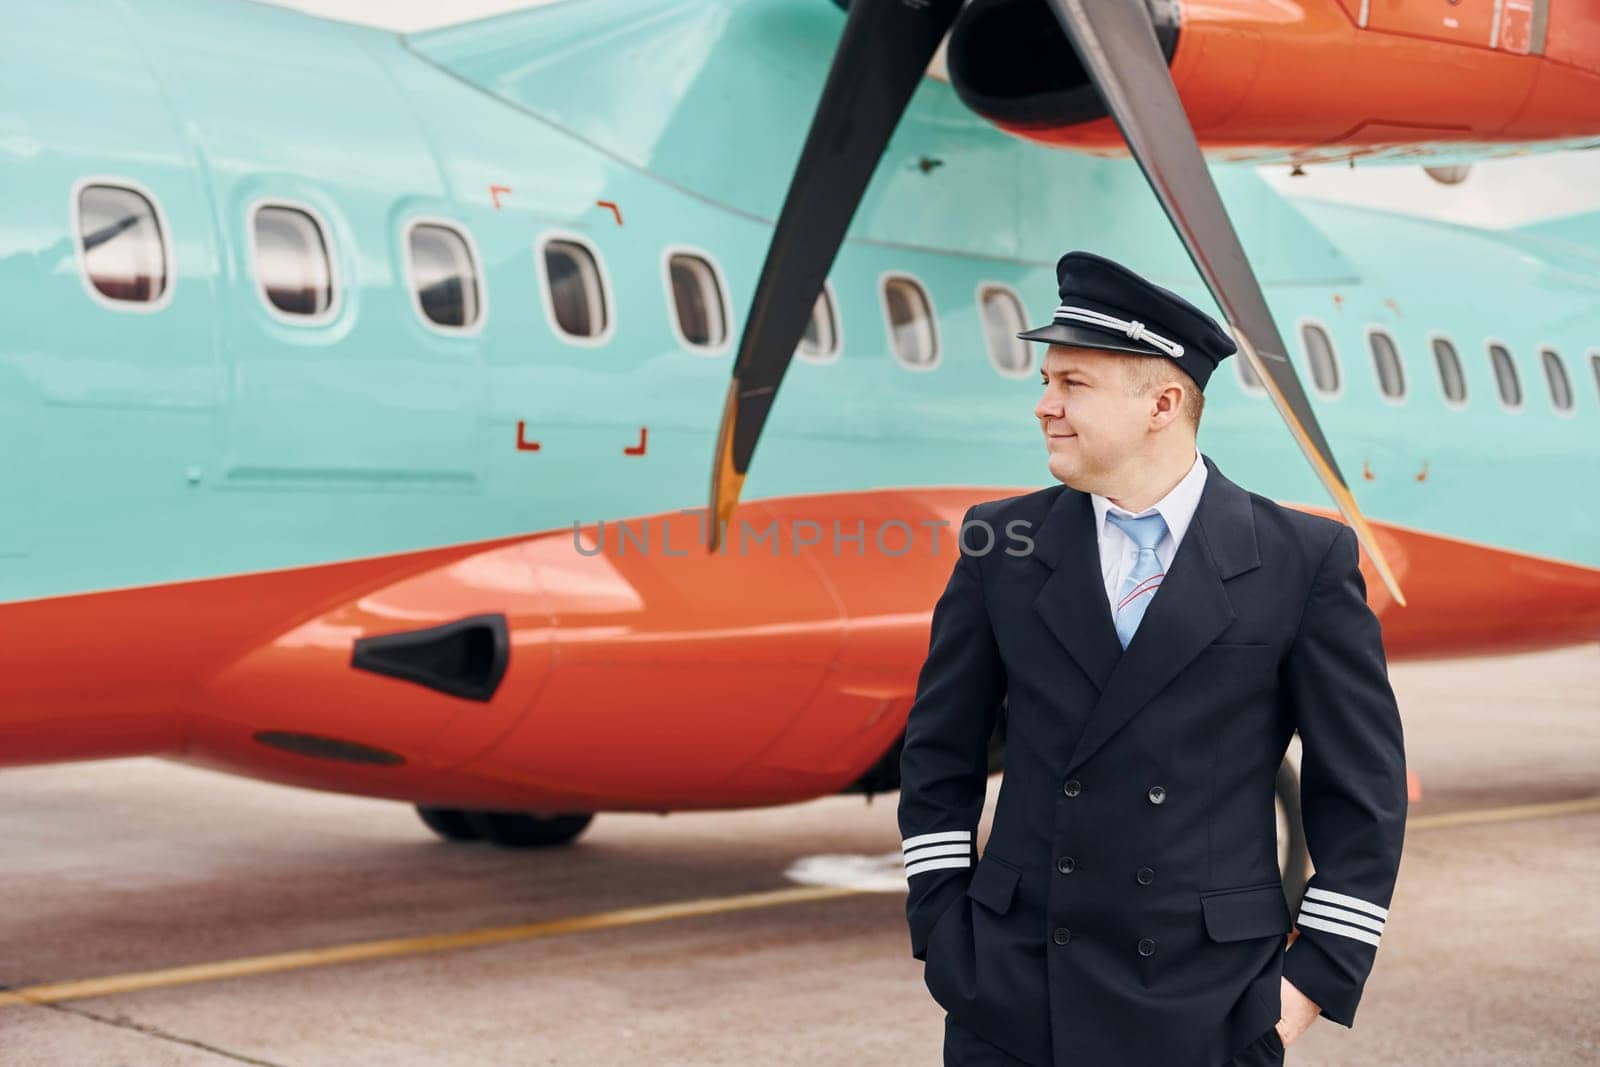 Experienced pilot in uniform standing outside near plane by Standret